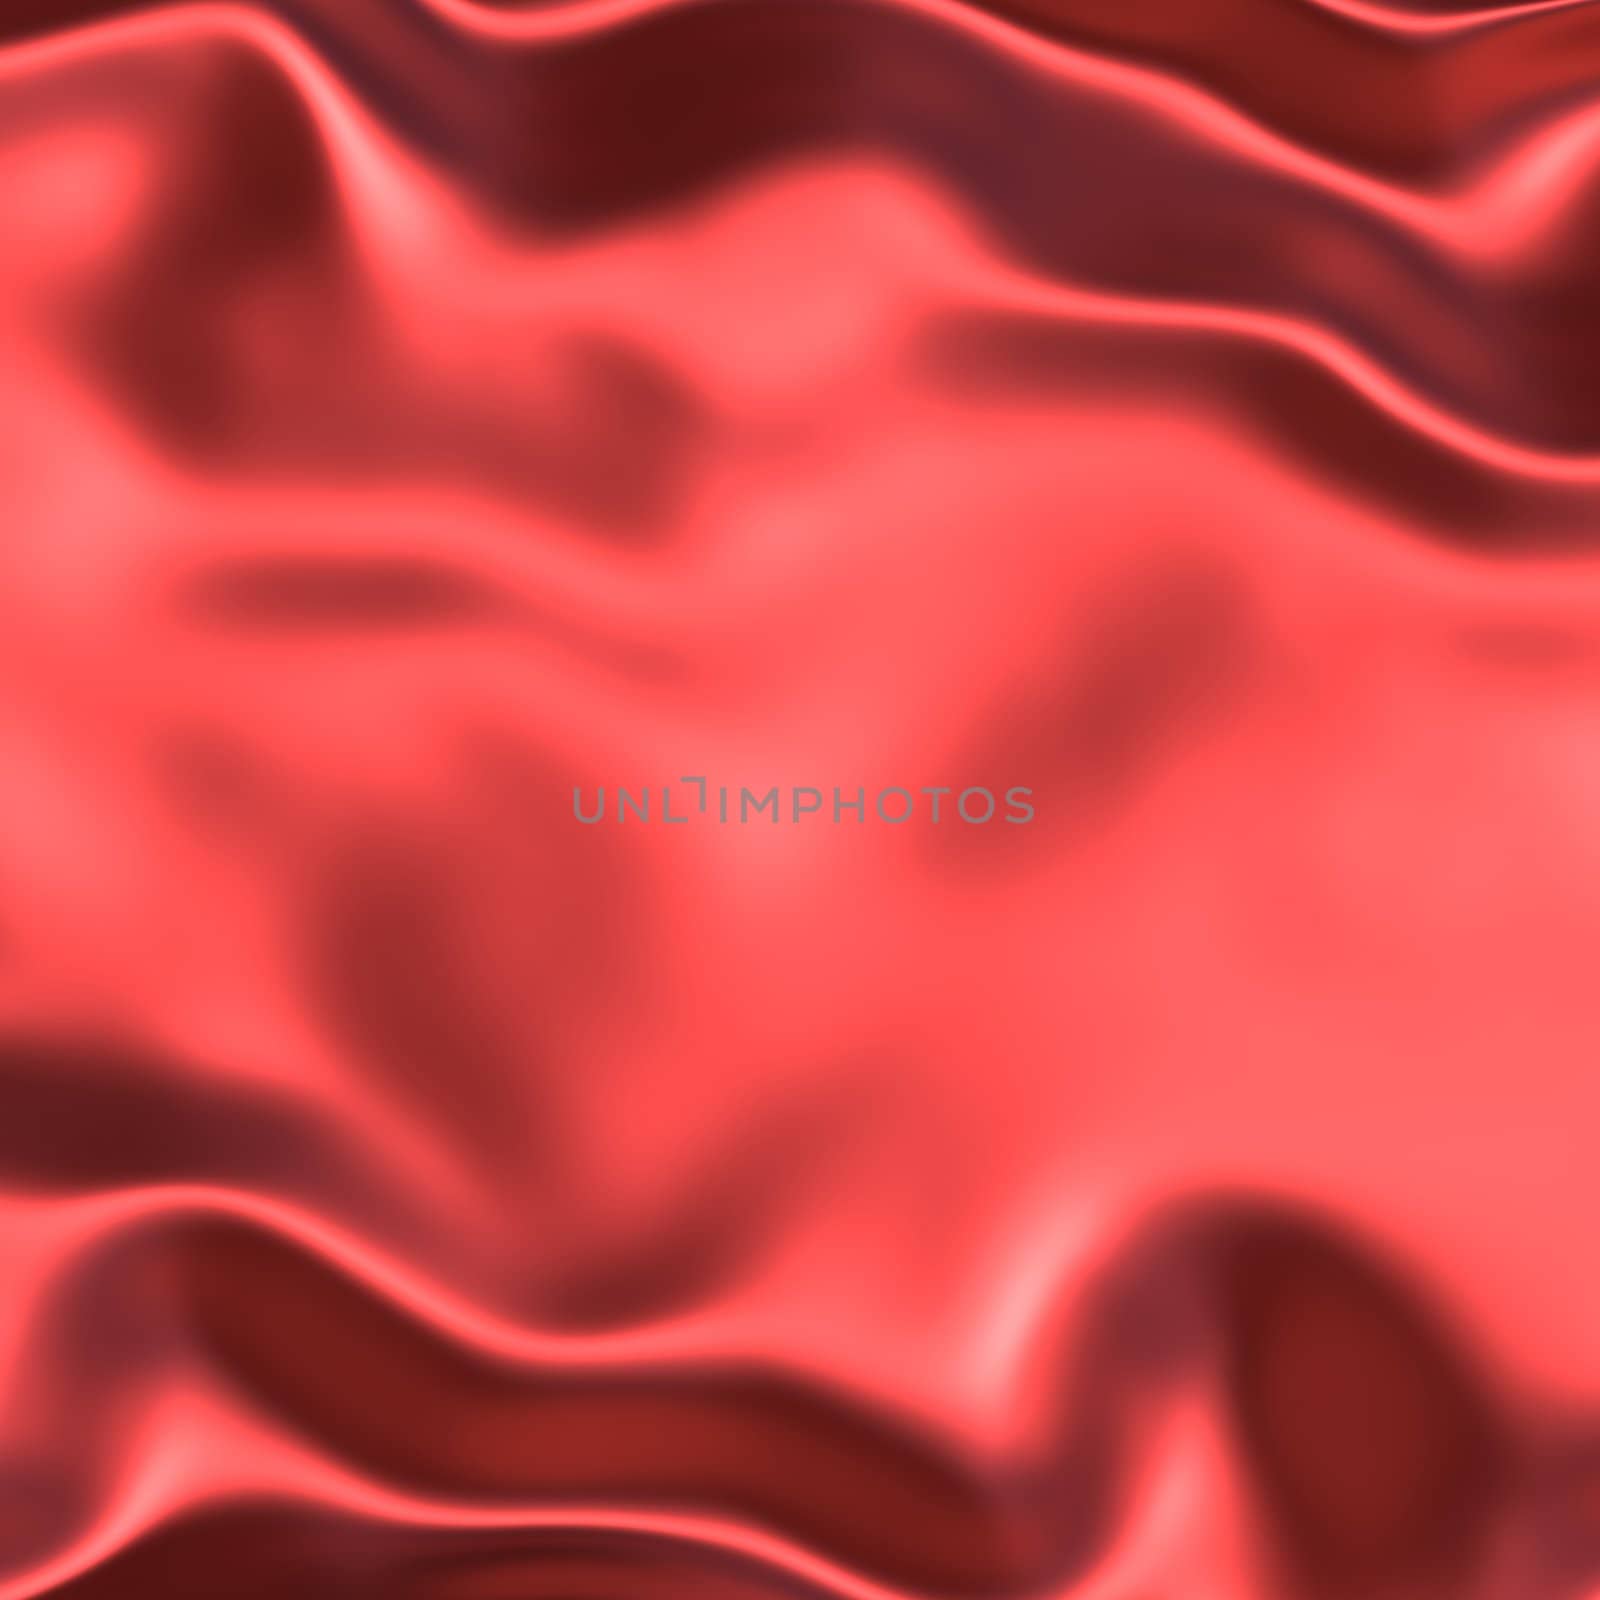 a large background made of beautiful red silk or satin